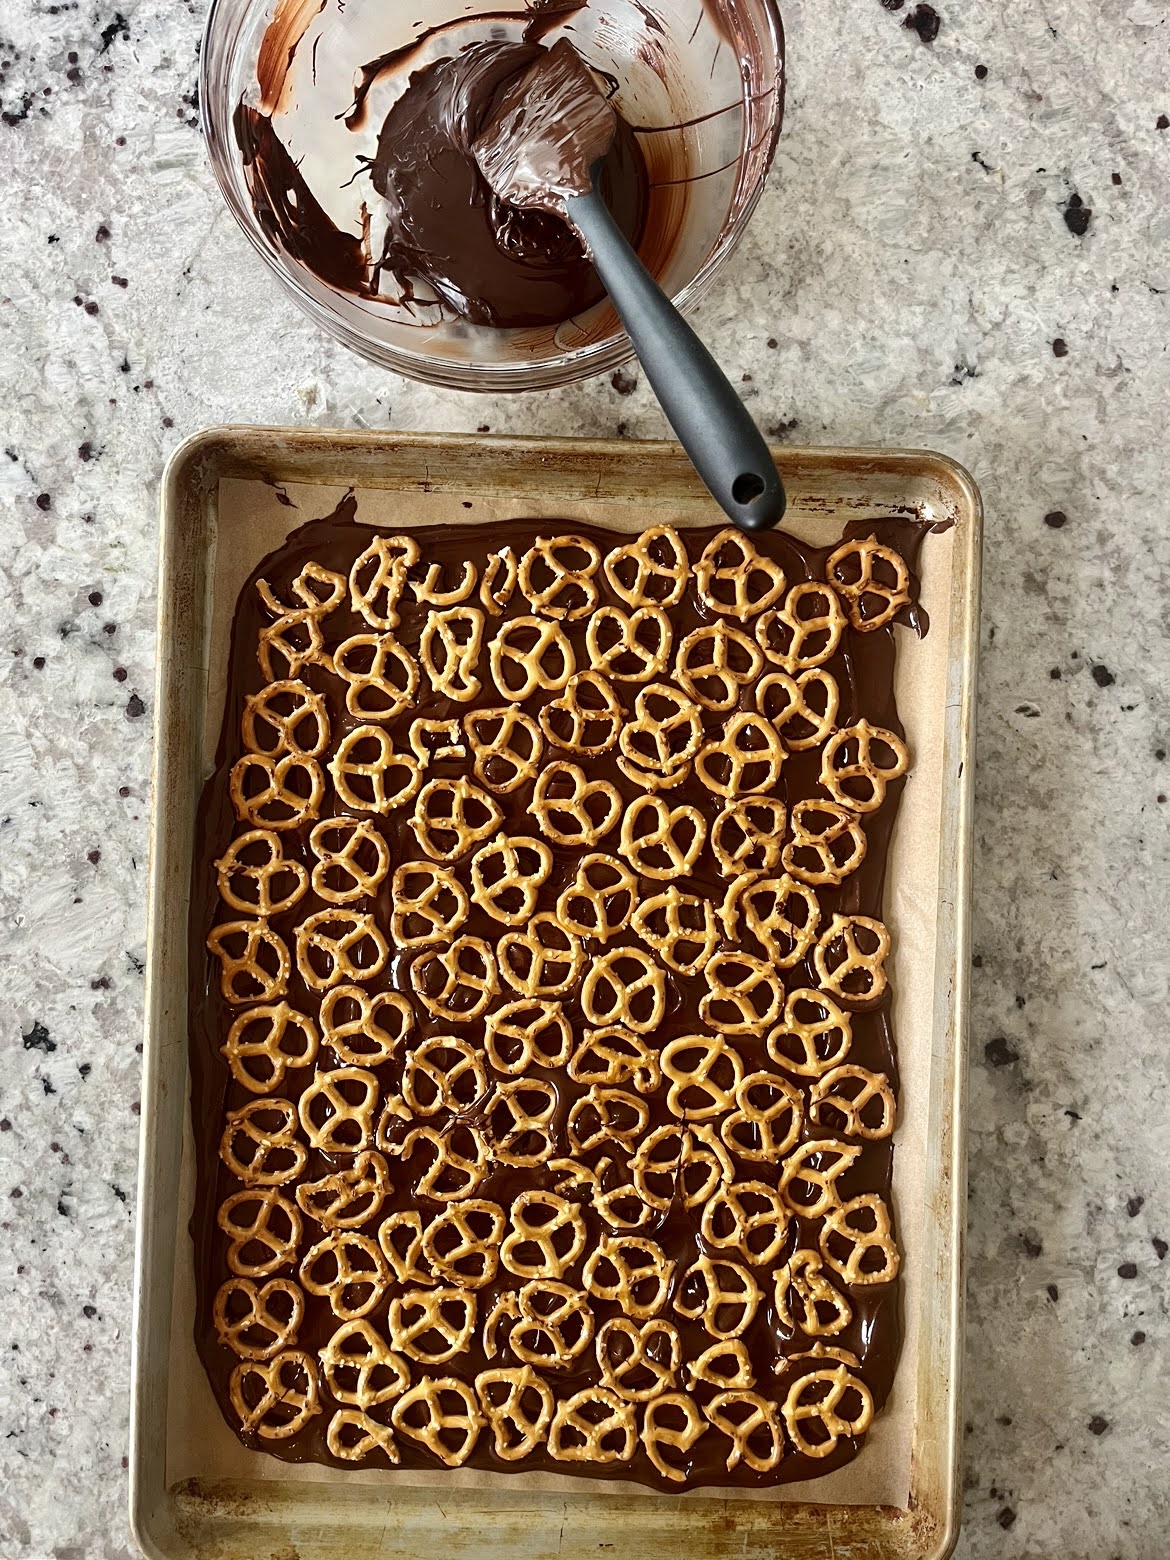 a process photo with melted chocolate spread throughout a cookie sheet with pretzels evenly placed on top